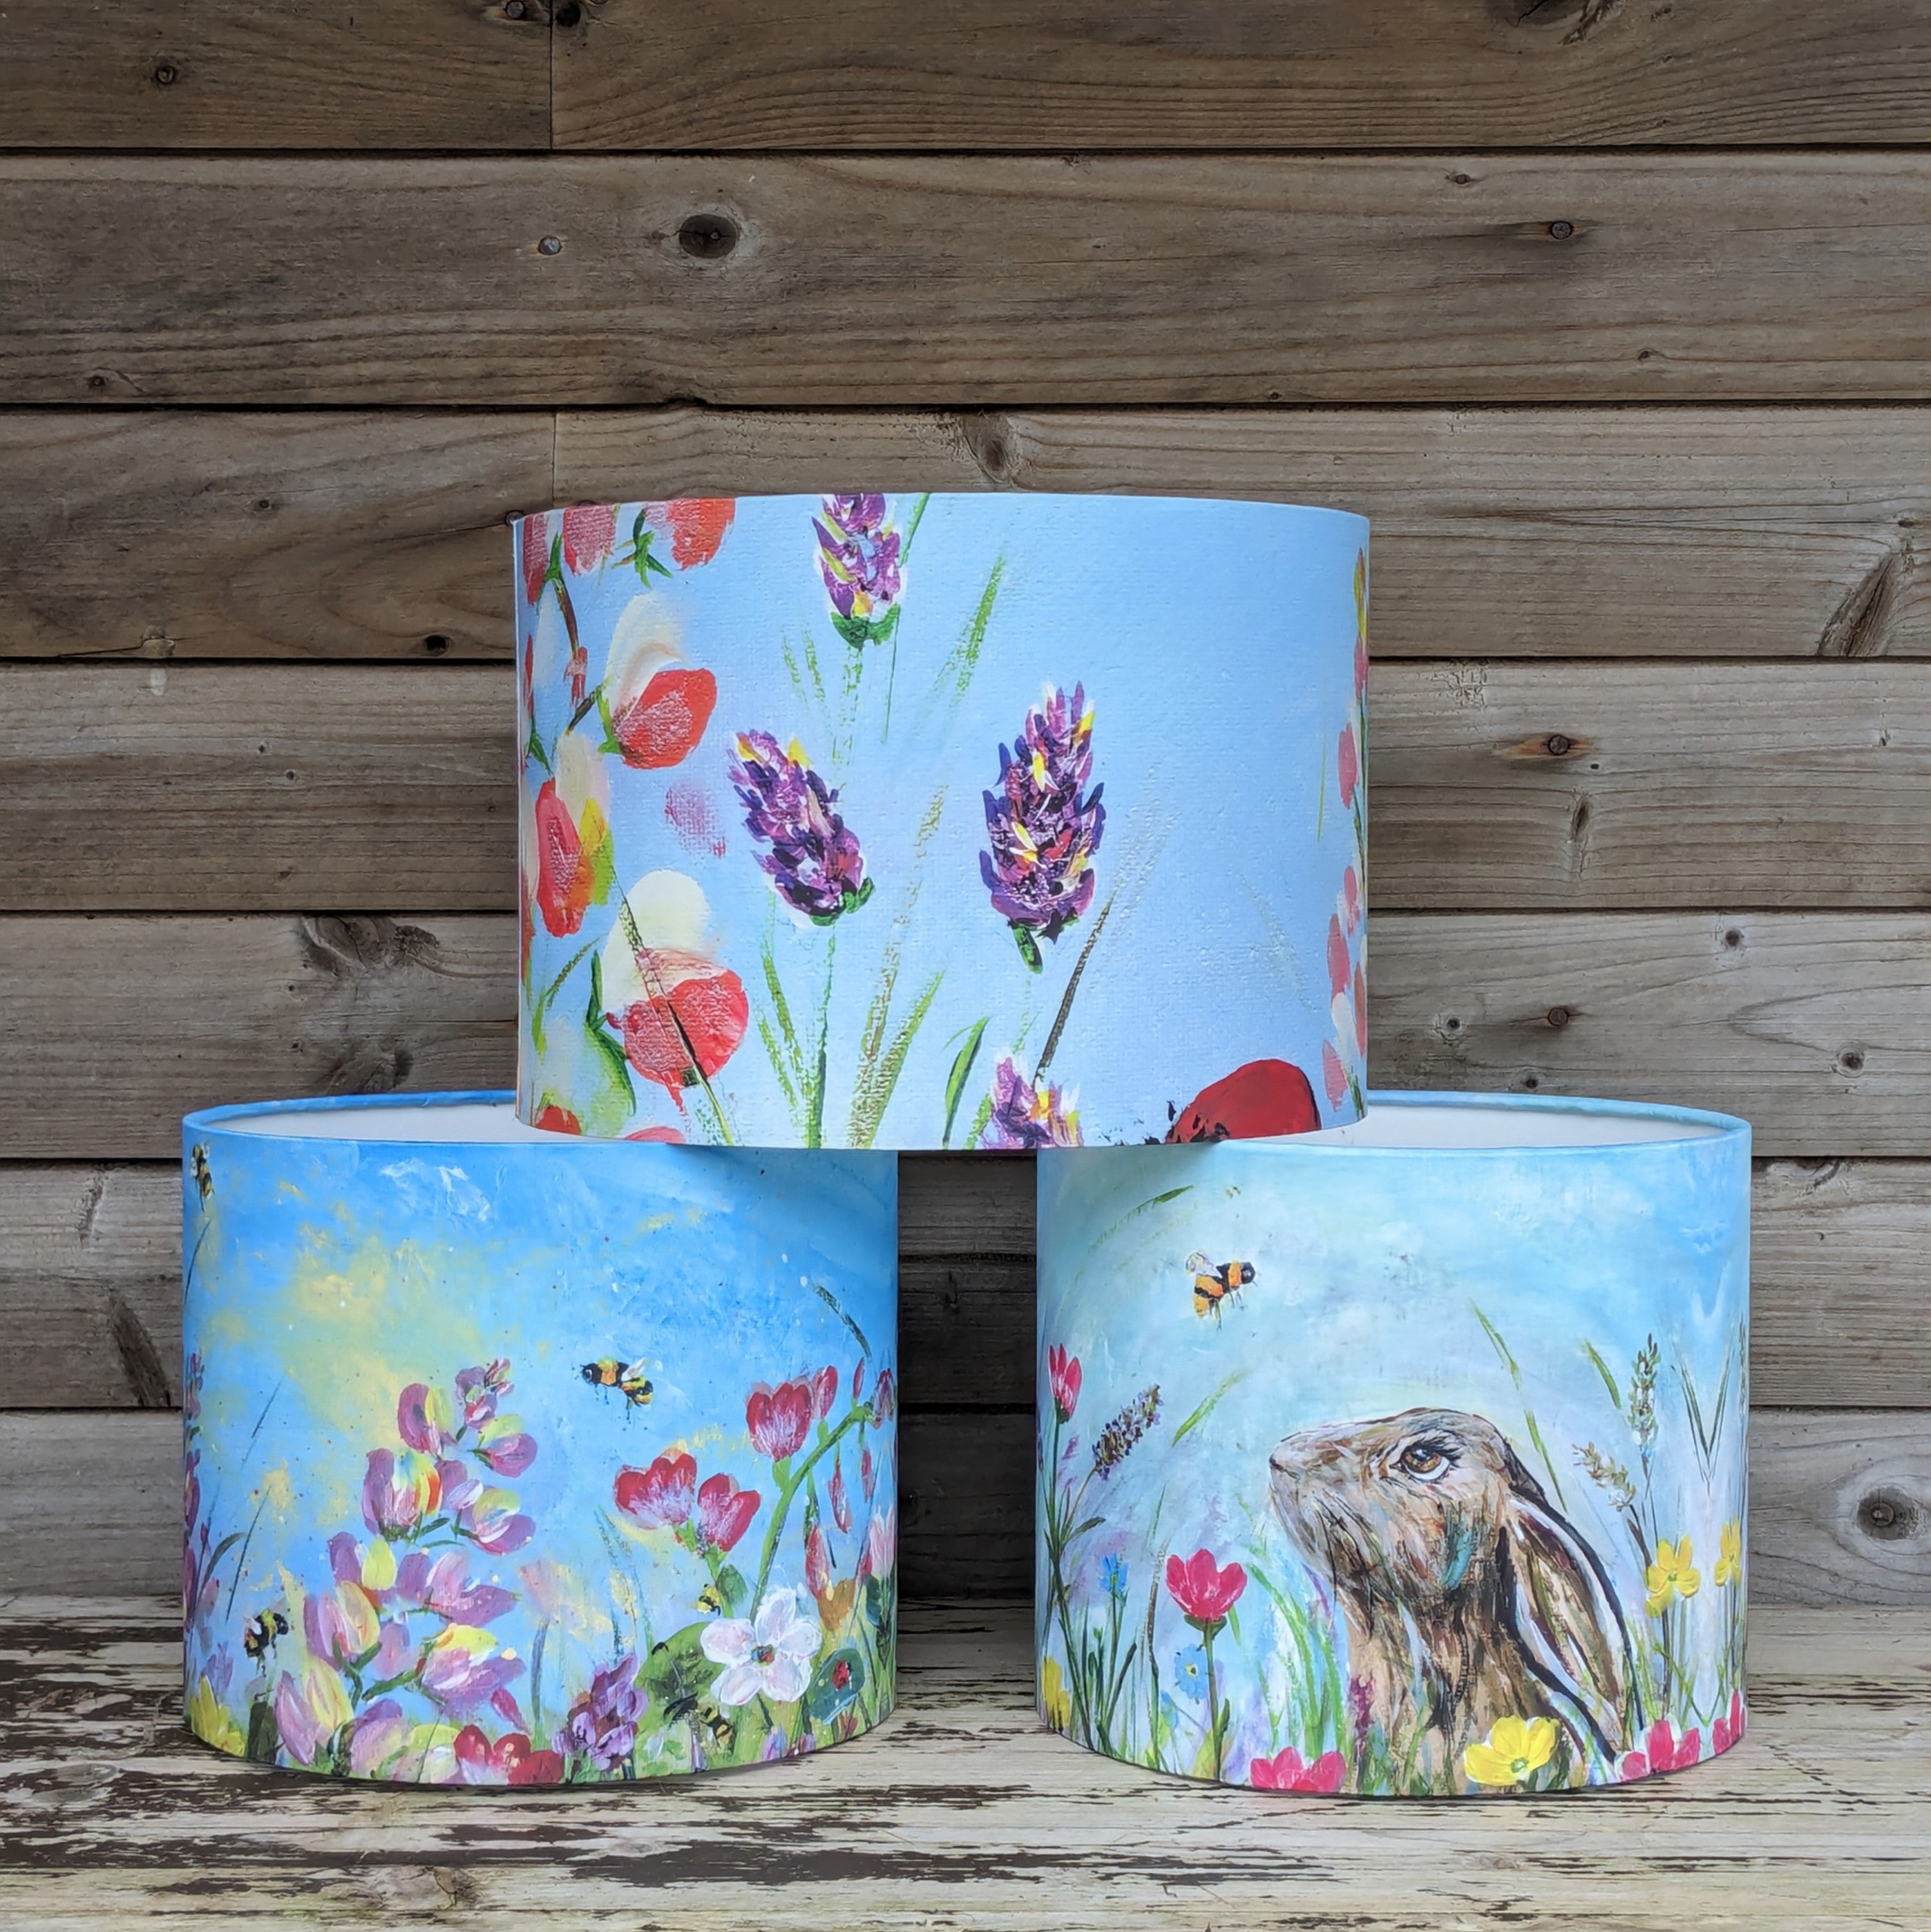 Create Your Own Lampshade Workshop 30th March 10am